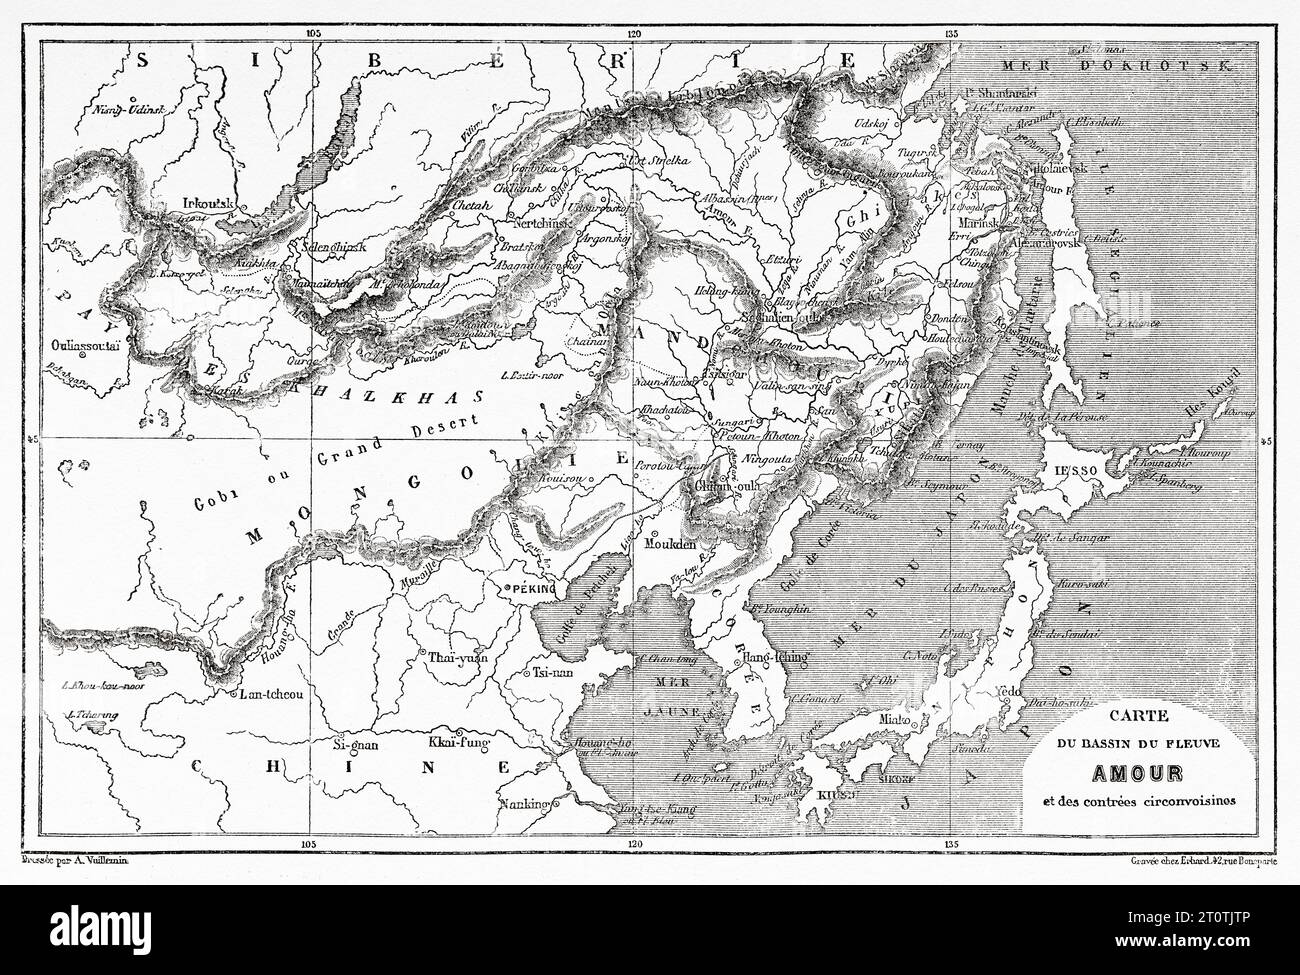 Amur river basin old map, Northeastern China. Old 19th century engraving from Le Tour du Monde 1860 Stock Photo